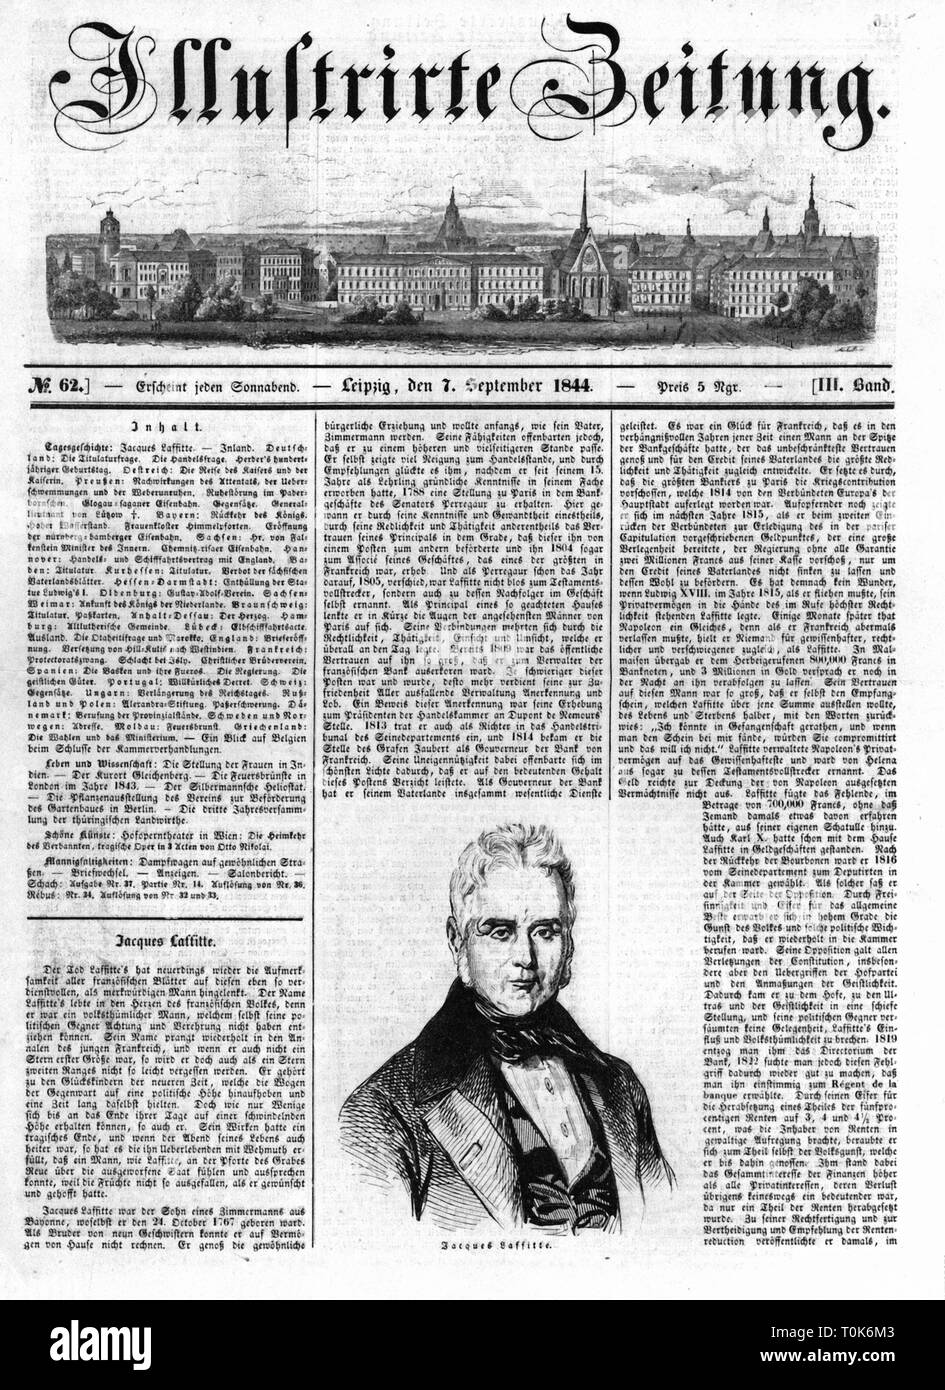 press / media, magazines / journals, 'Illustrirte Zeitung', no. 62, Leipzig, 7.9.1844, title, portrait of Jacques Lafitte, wood engraving,  journal, Germany, Saxony, 19th century, historic, historical, Additional-Rights-Clearance-Info-Not-Available Stock Photo